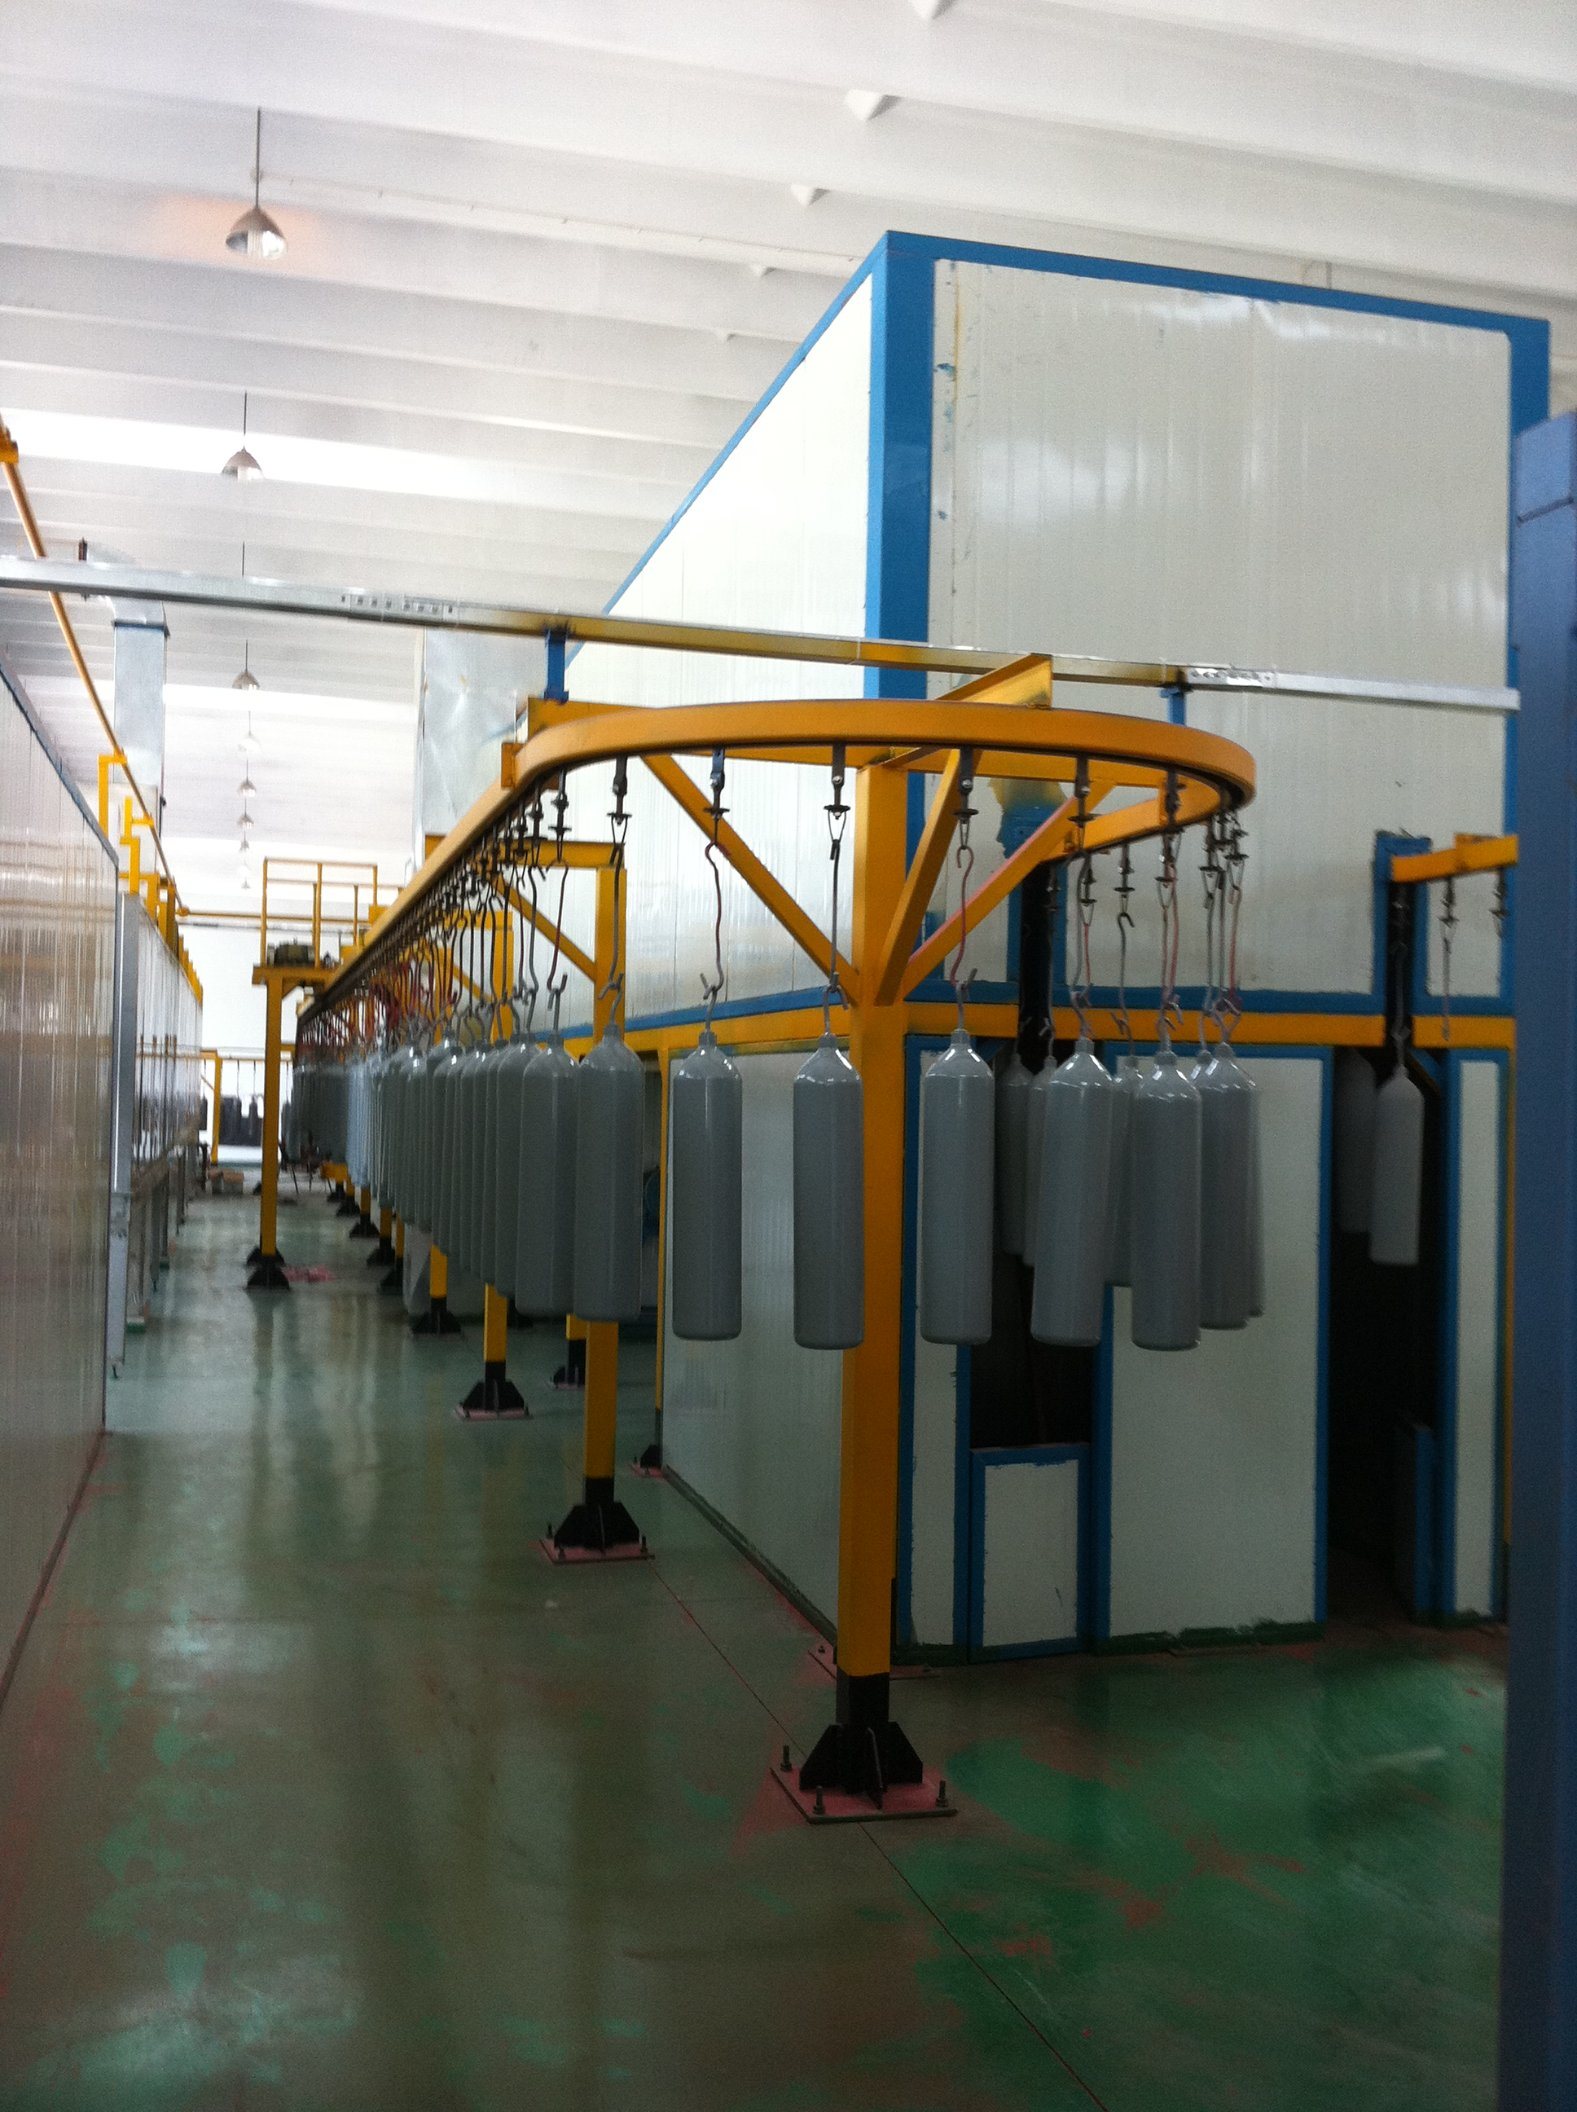 CNG Cylinder Powder Coating Line, Spray Painting Booth for Oxygen Cylinder